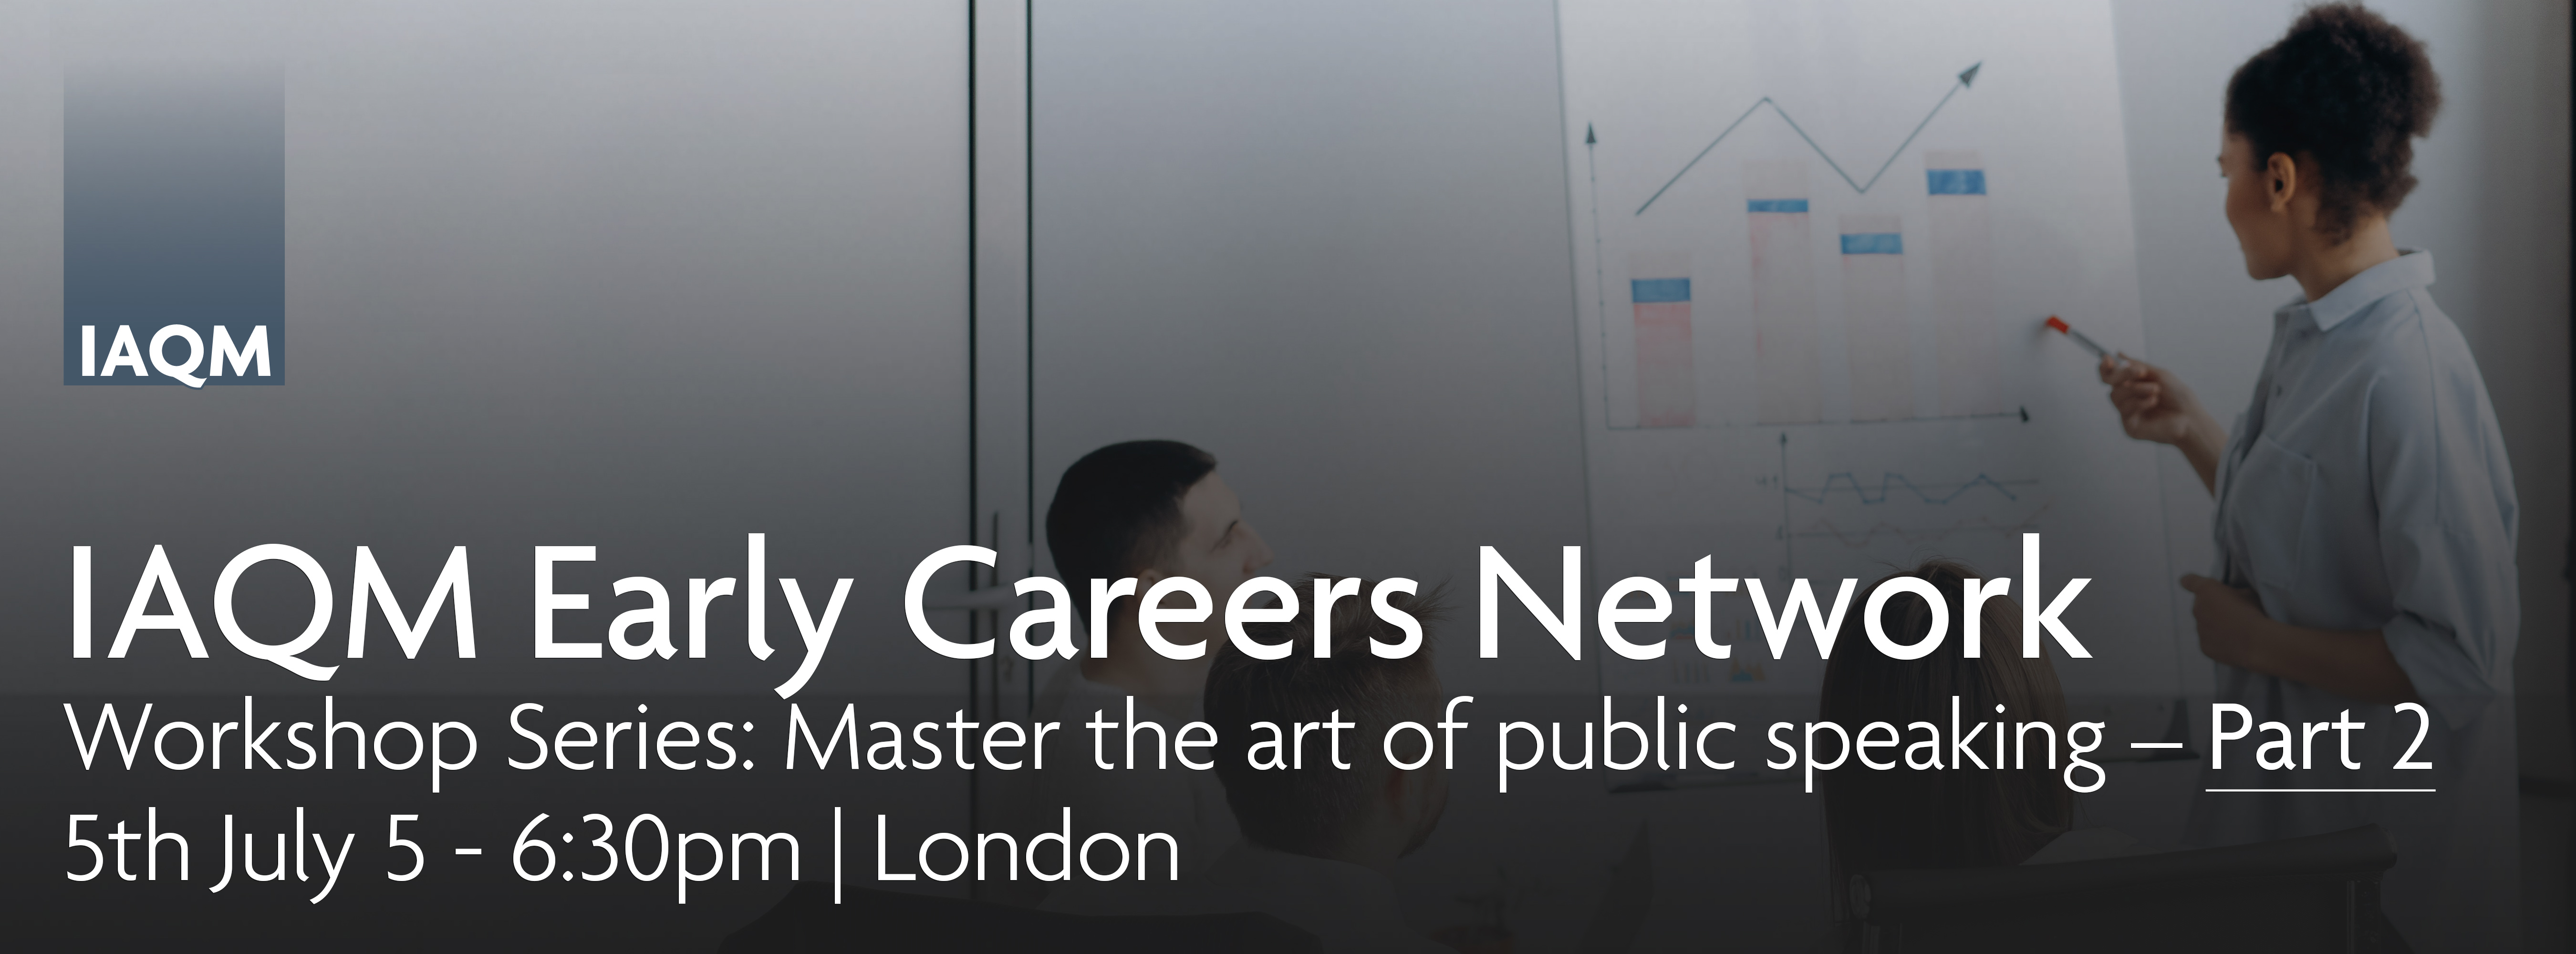 Female young professional presenting data to 3 other young professionals. Overlaid with text reading "IAQM Early Careers Network Workshop Series: Master the art of public speaking – Part 2. 5th July 5 - 6.30pm | London" Featuring the IAQM logo in the top left hand corner